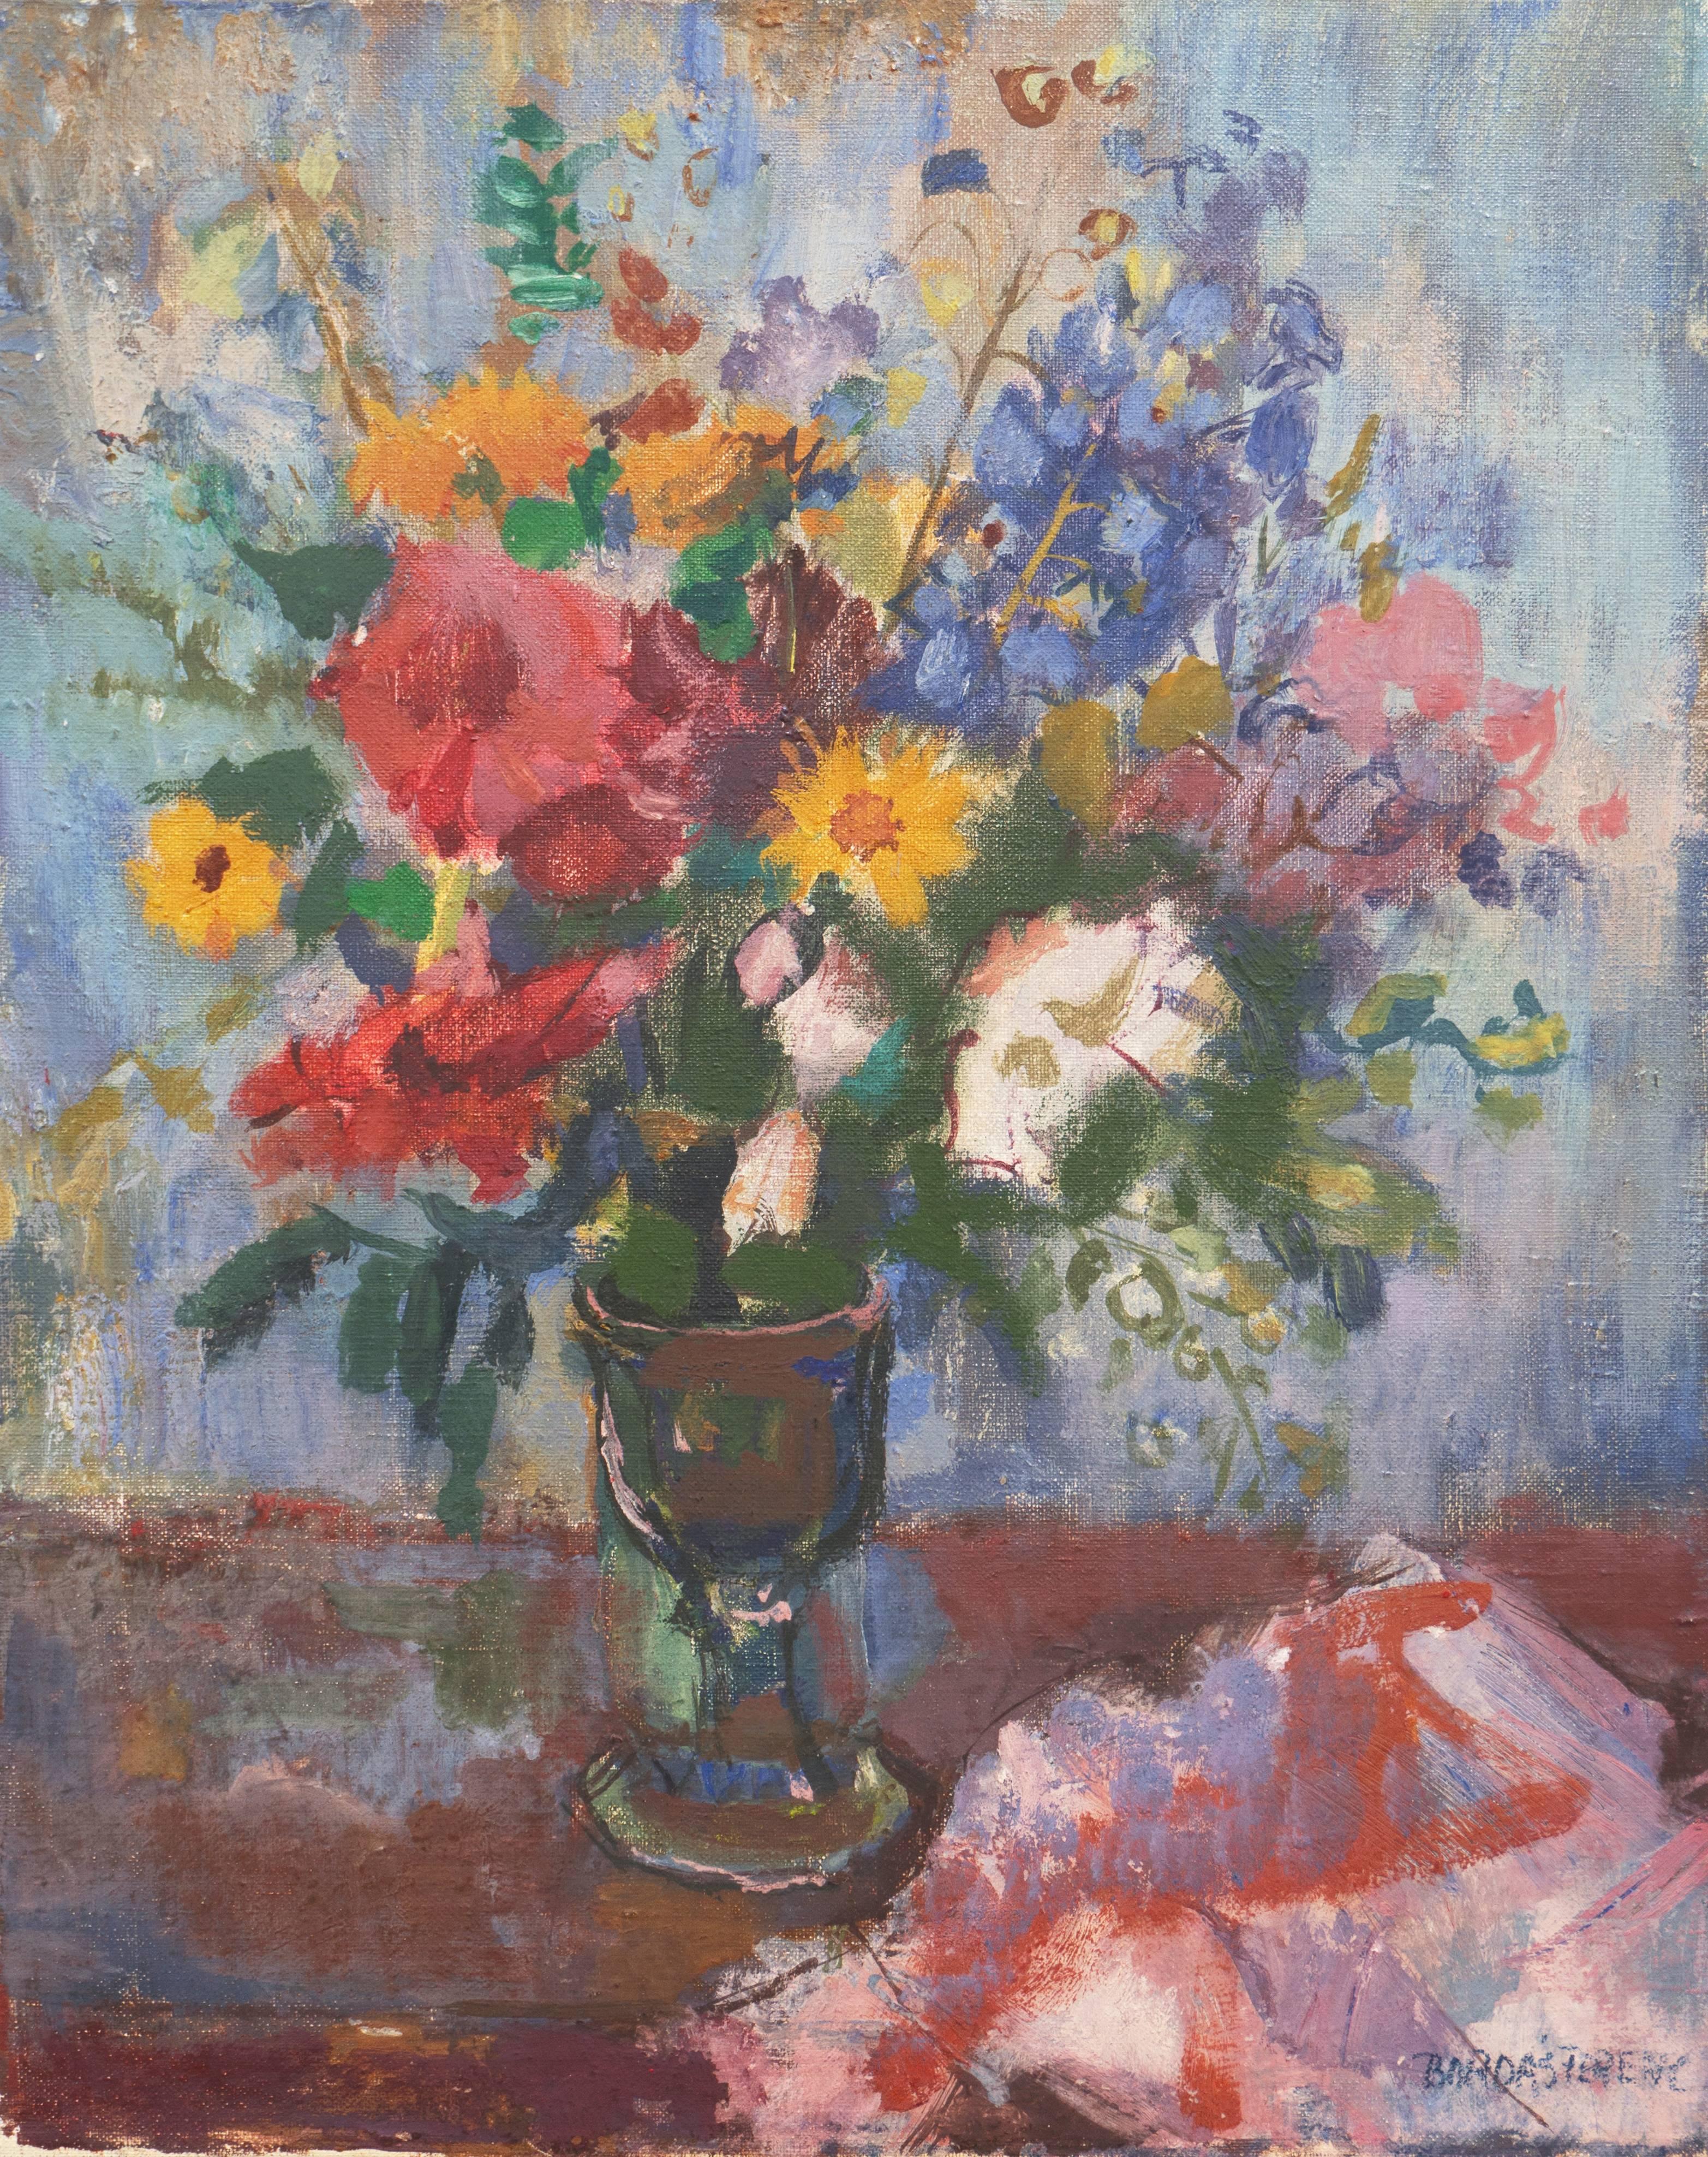 Bordas Ferenc Still-Life Painting - 'Still Life of Flowers', Hungarian Academy of Fine Arts, Budapest